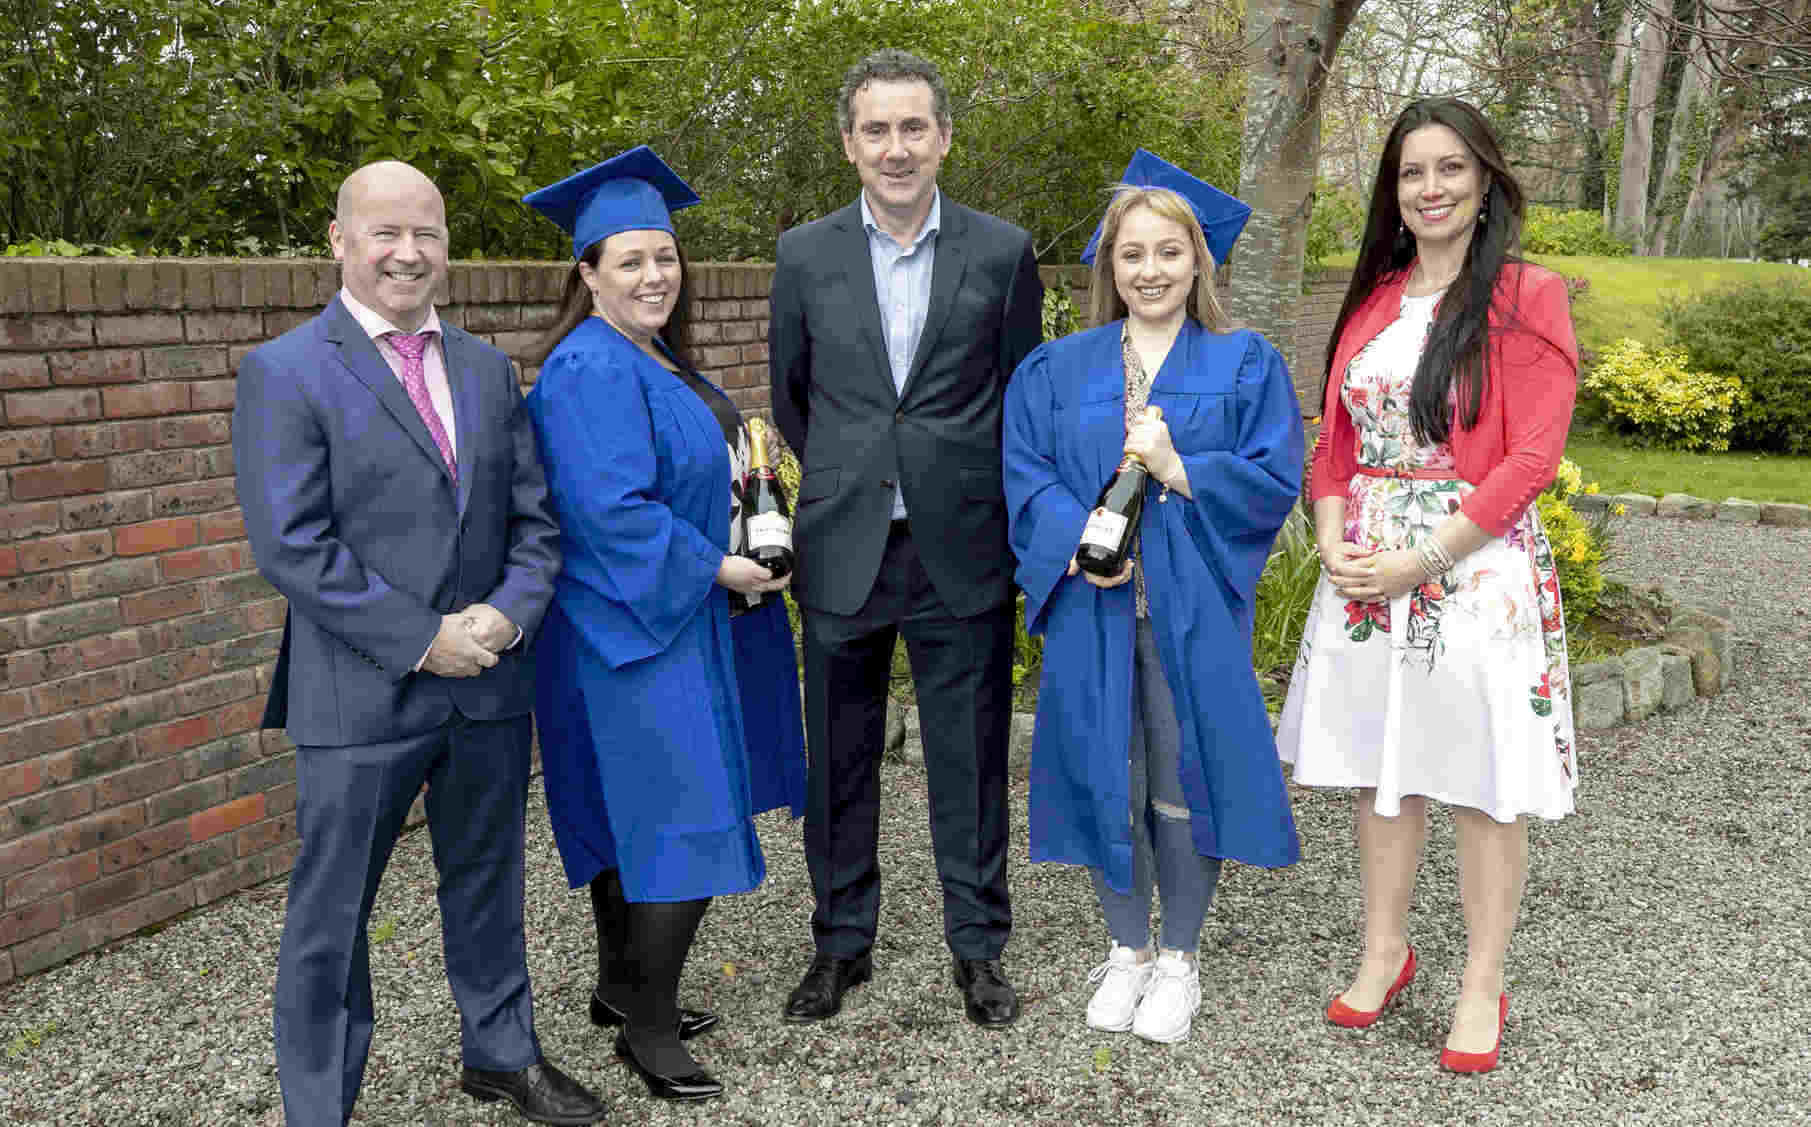 From left: LVA Chairman Alan Campbell; Senior Stream Student prize winner Claire Murphy; Fevre Wines’ Brendan Doyle; Junior Stream Student prize winner Leah Bell-Harris and LVA Diploma Course Director Gillian Knight. 